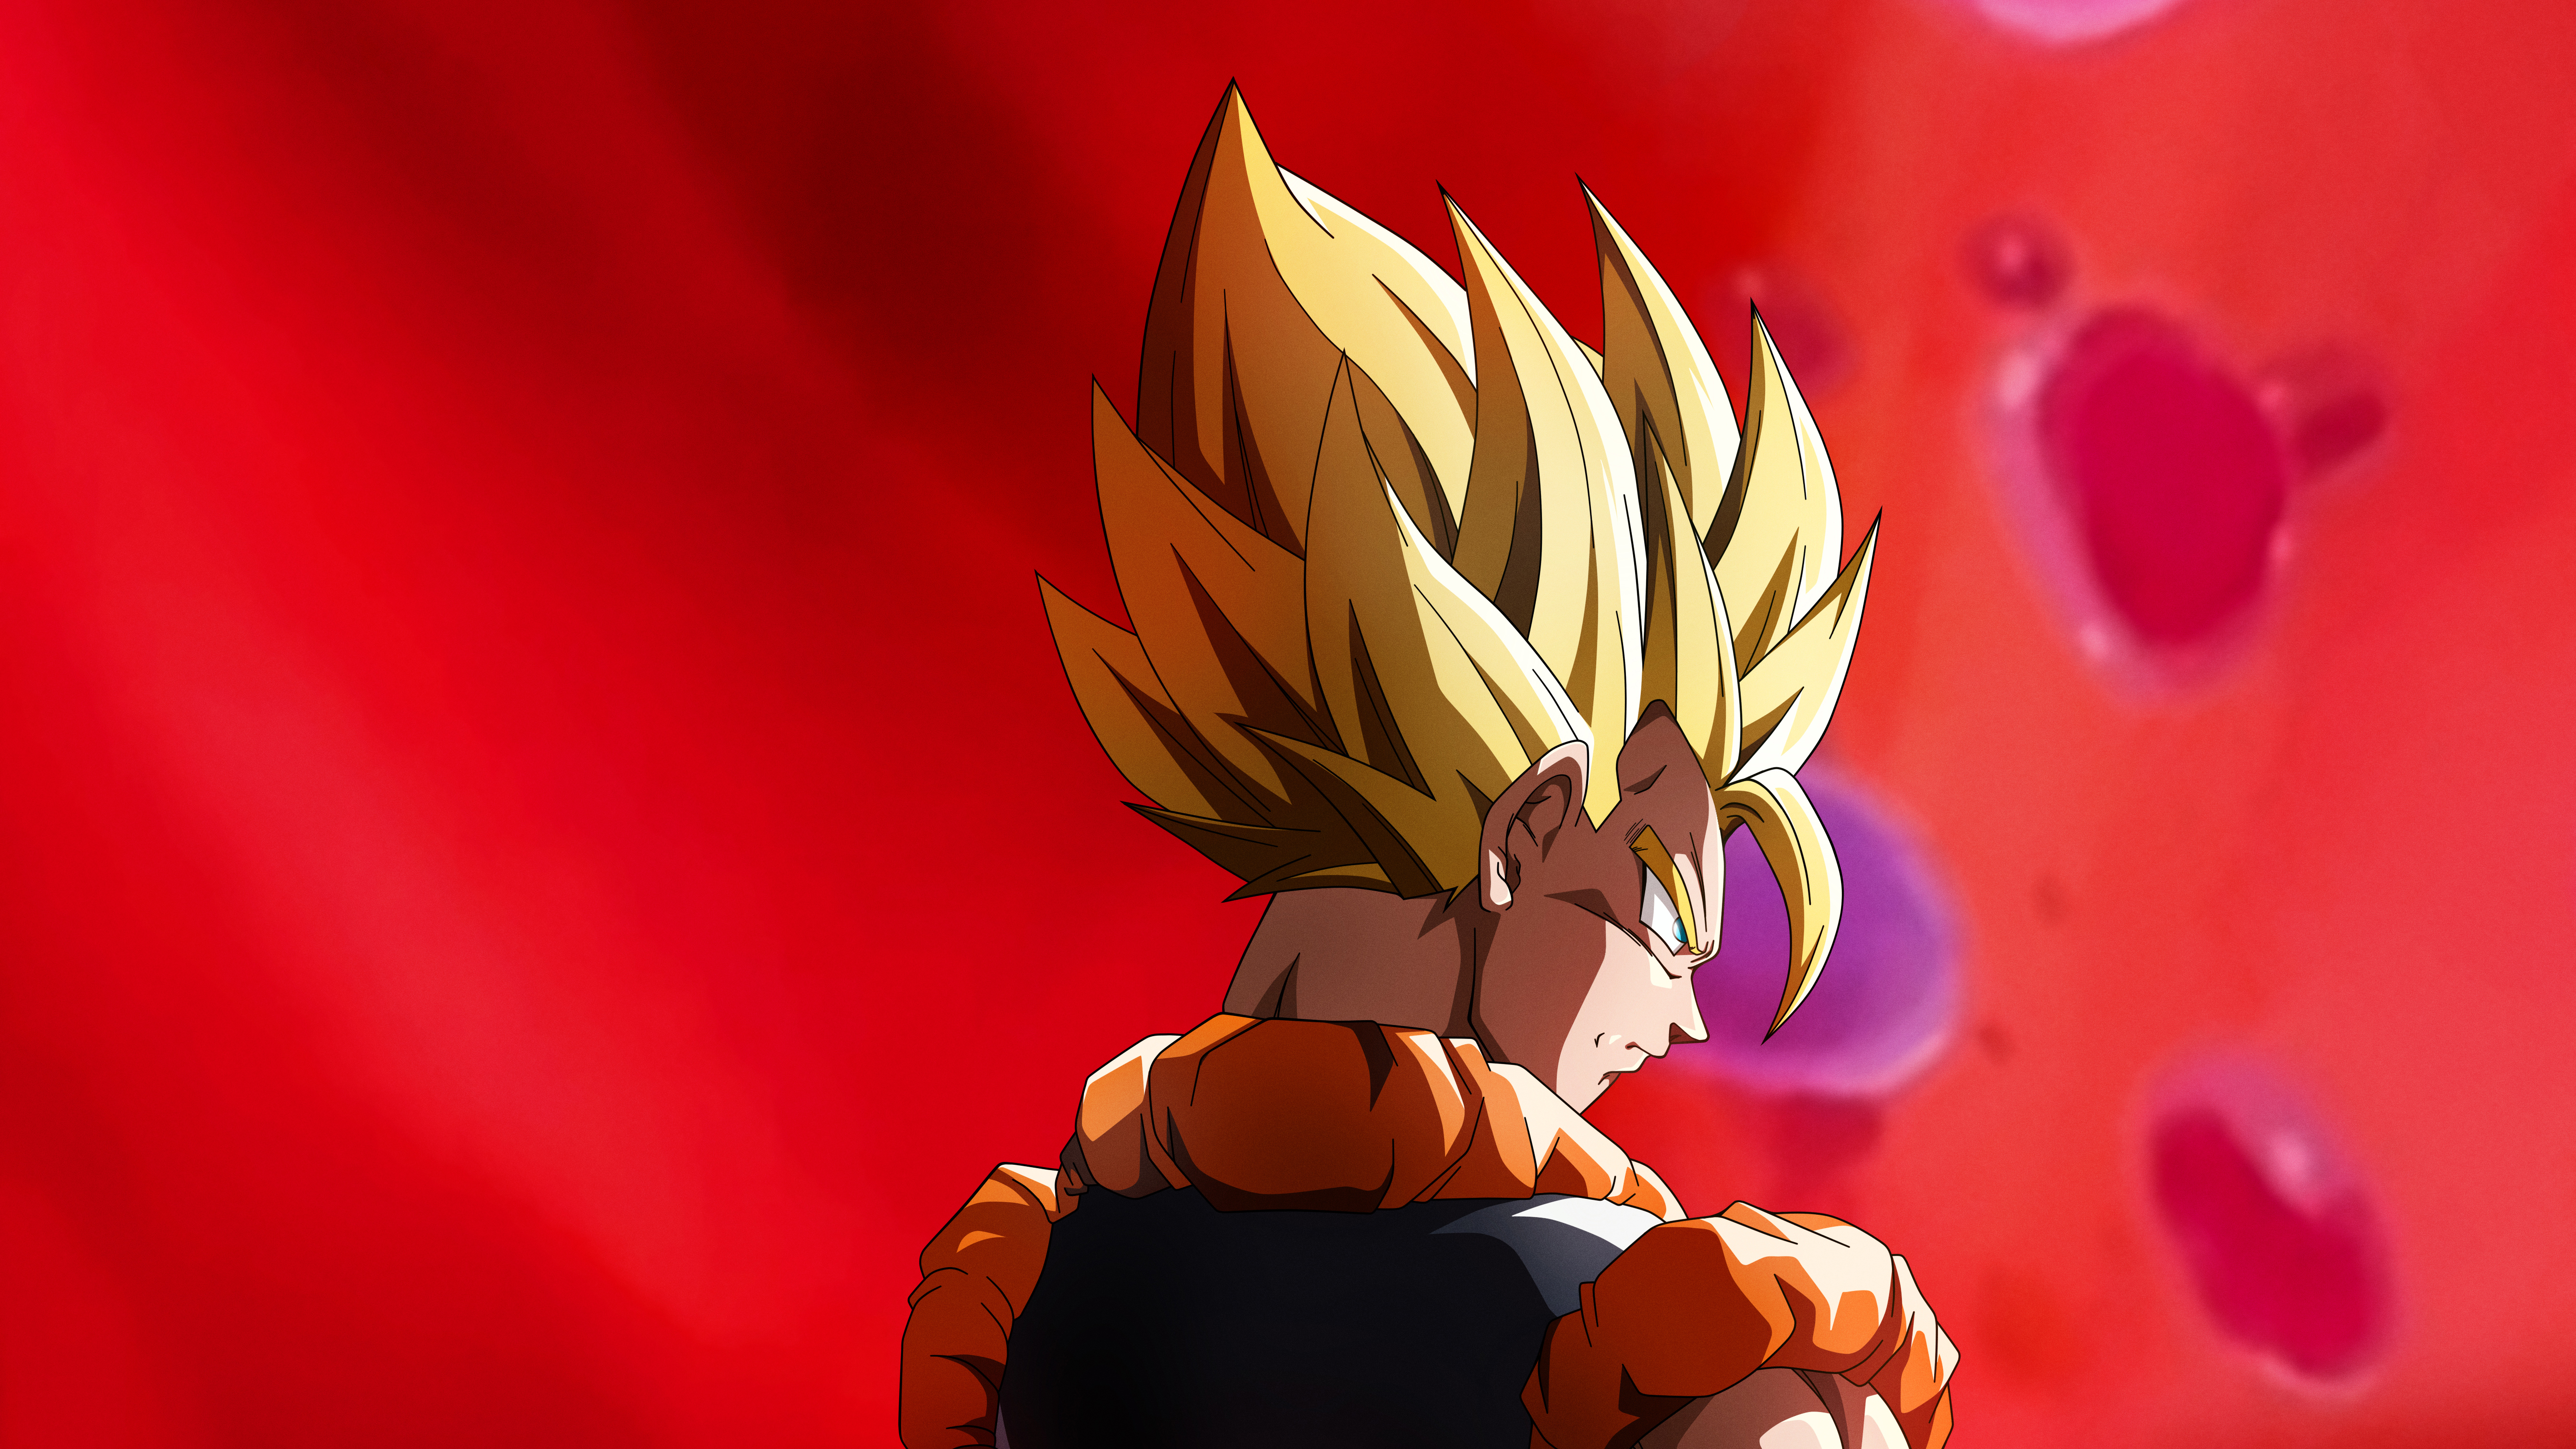 2048x2048 Dragon Ball Z Gogeta 4k Ipad Air ,HD 4k Wallpapers,Images, Backgrounds,Photos and Pictures